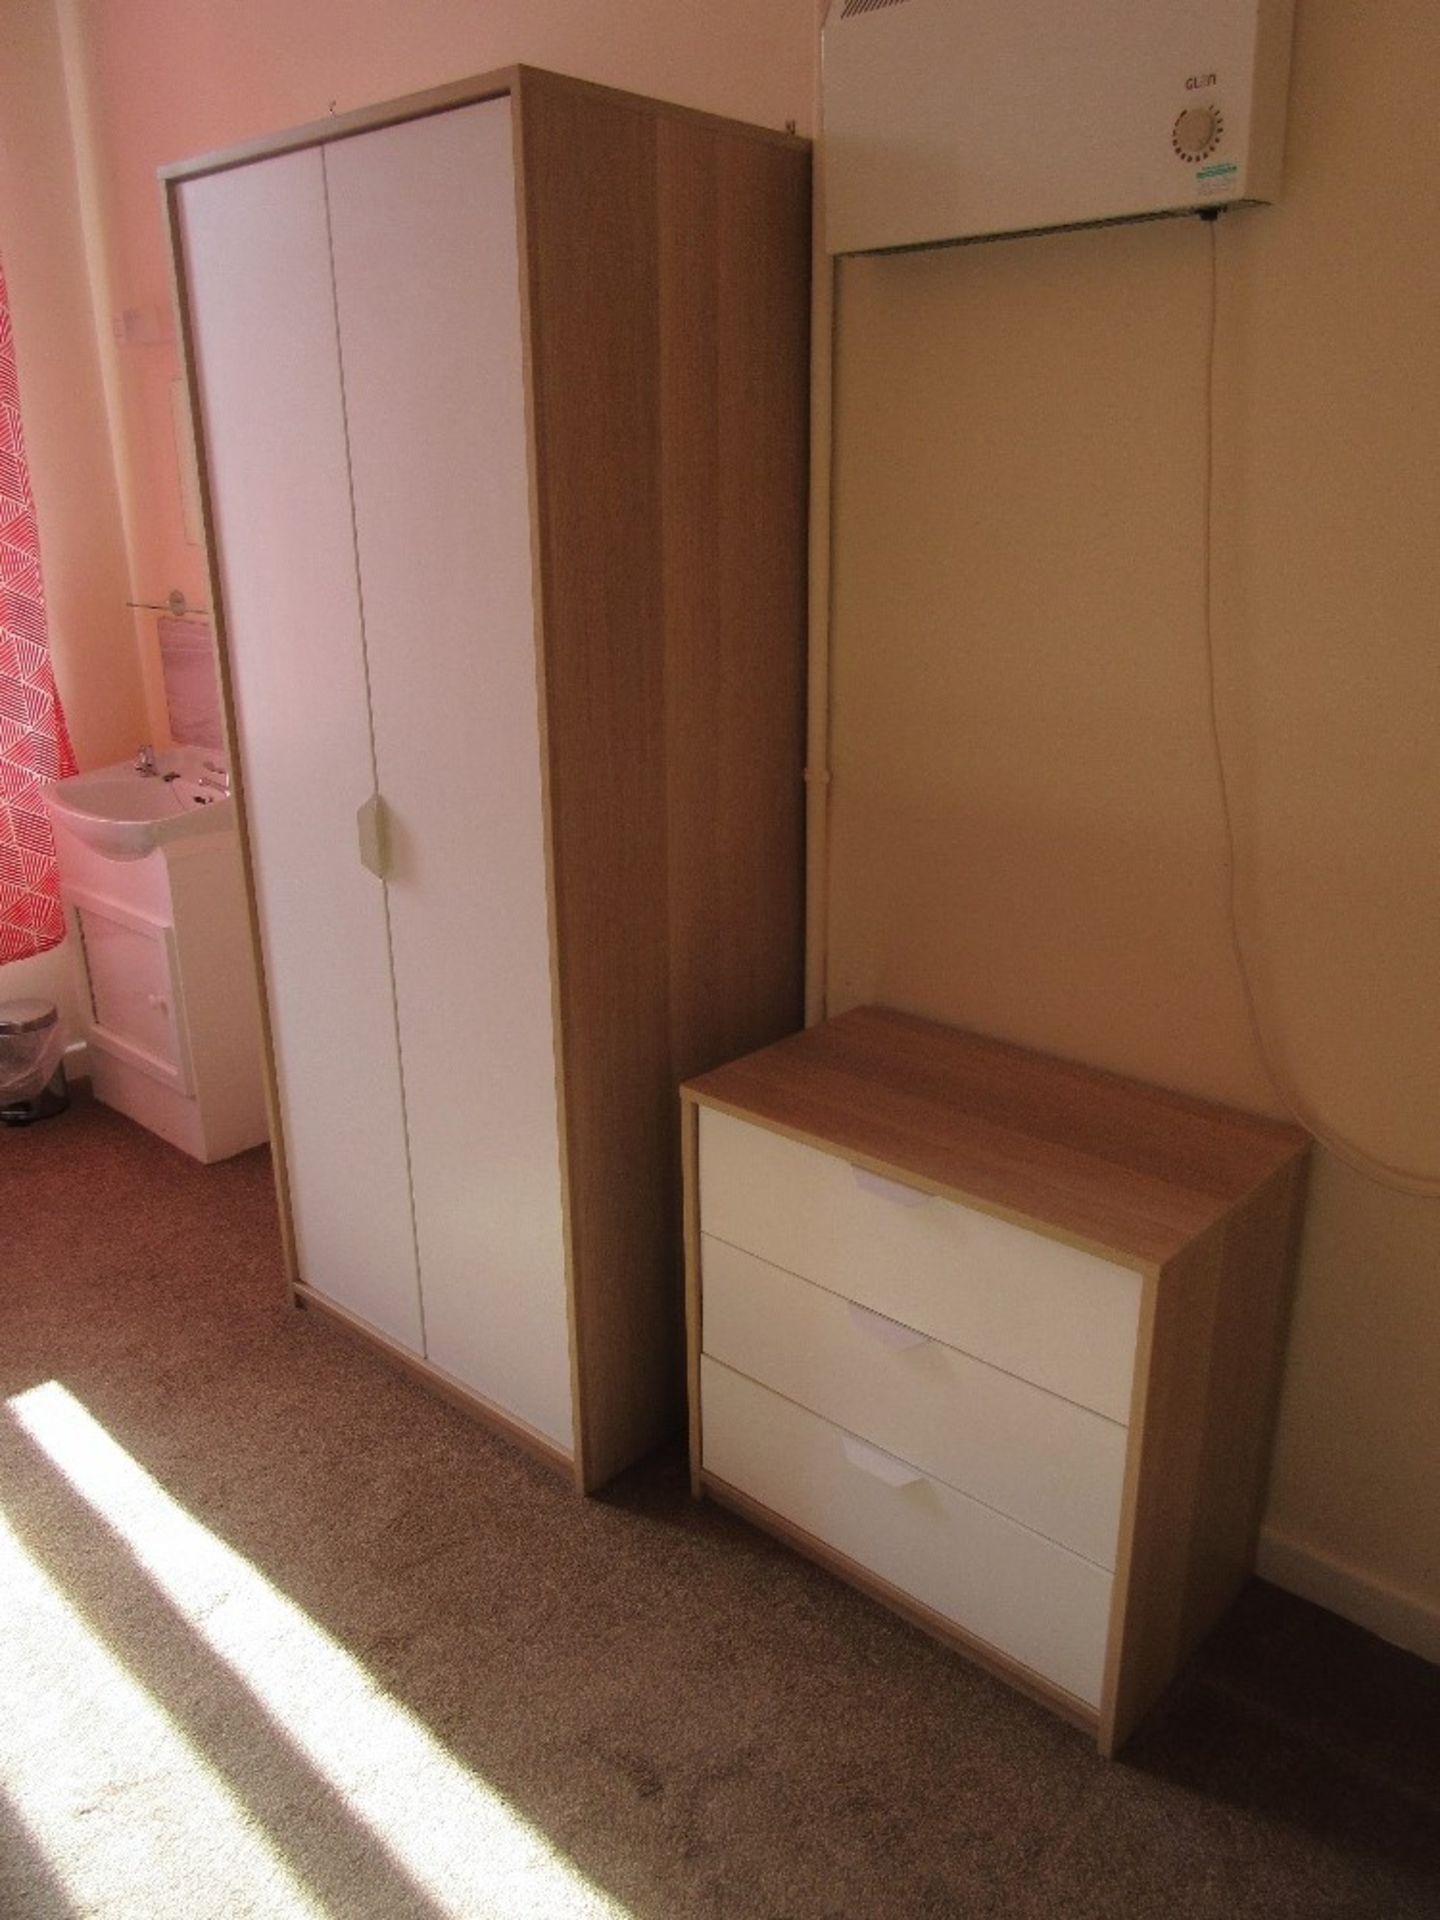 Contents of Room 13 to include bed base, mattress, glass shelf, wardrobe, three drawer unit, - Image 3 of 6